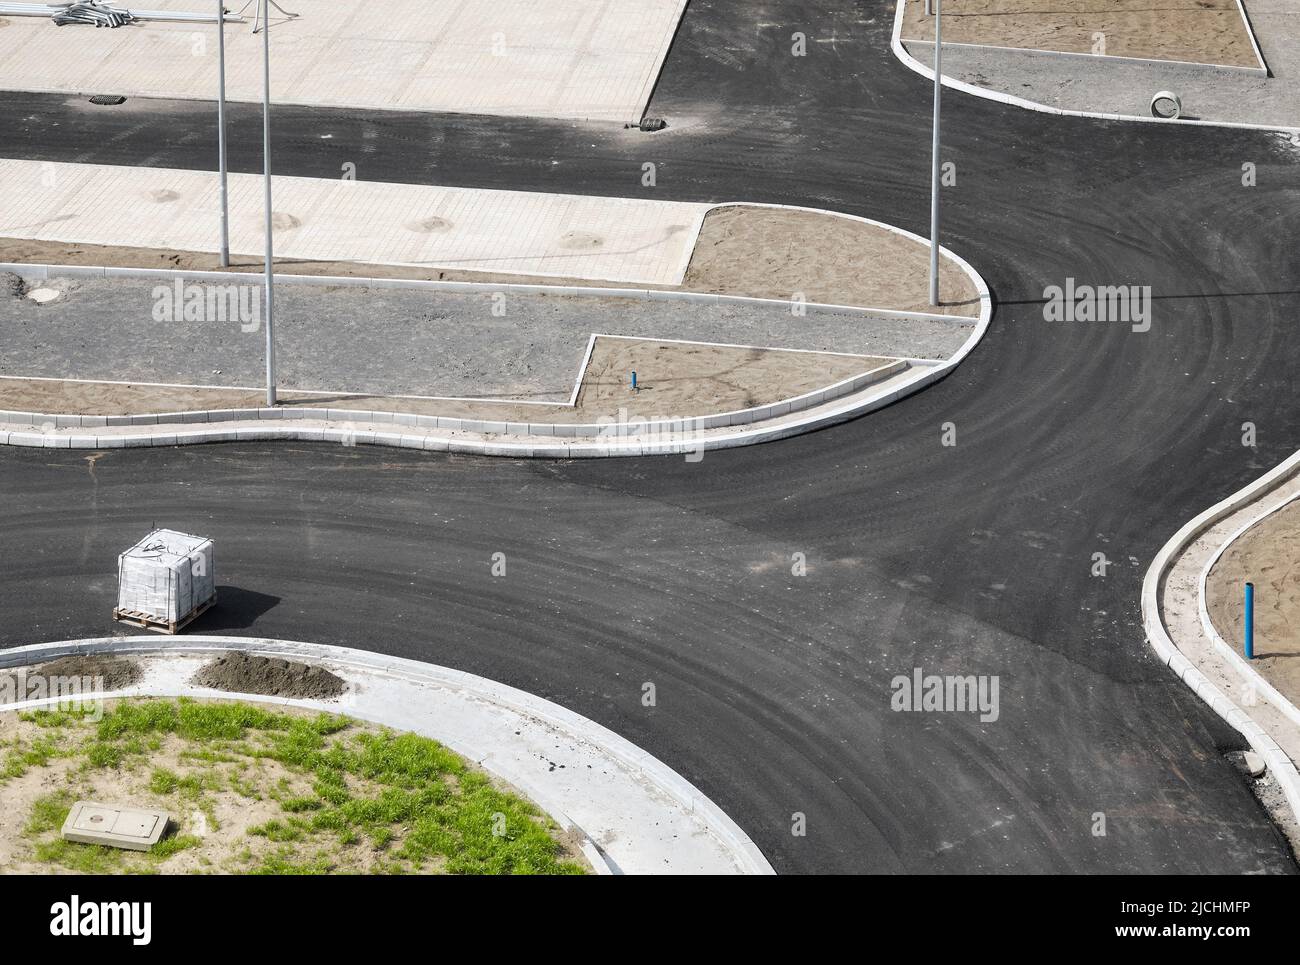 Aerial view of newly built intersection and parking, construction site. Stock Photo